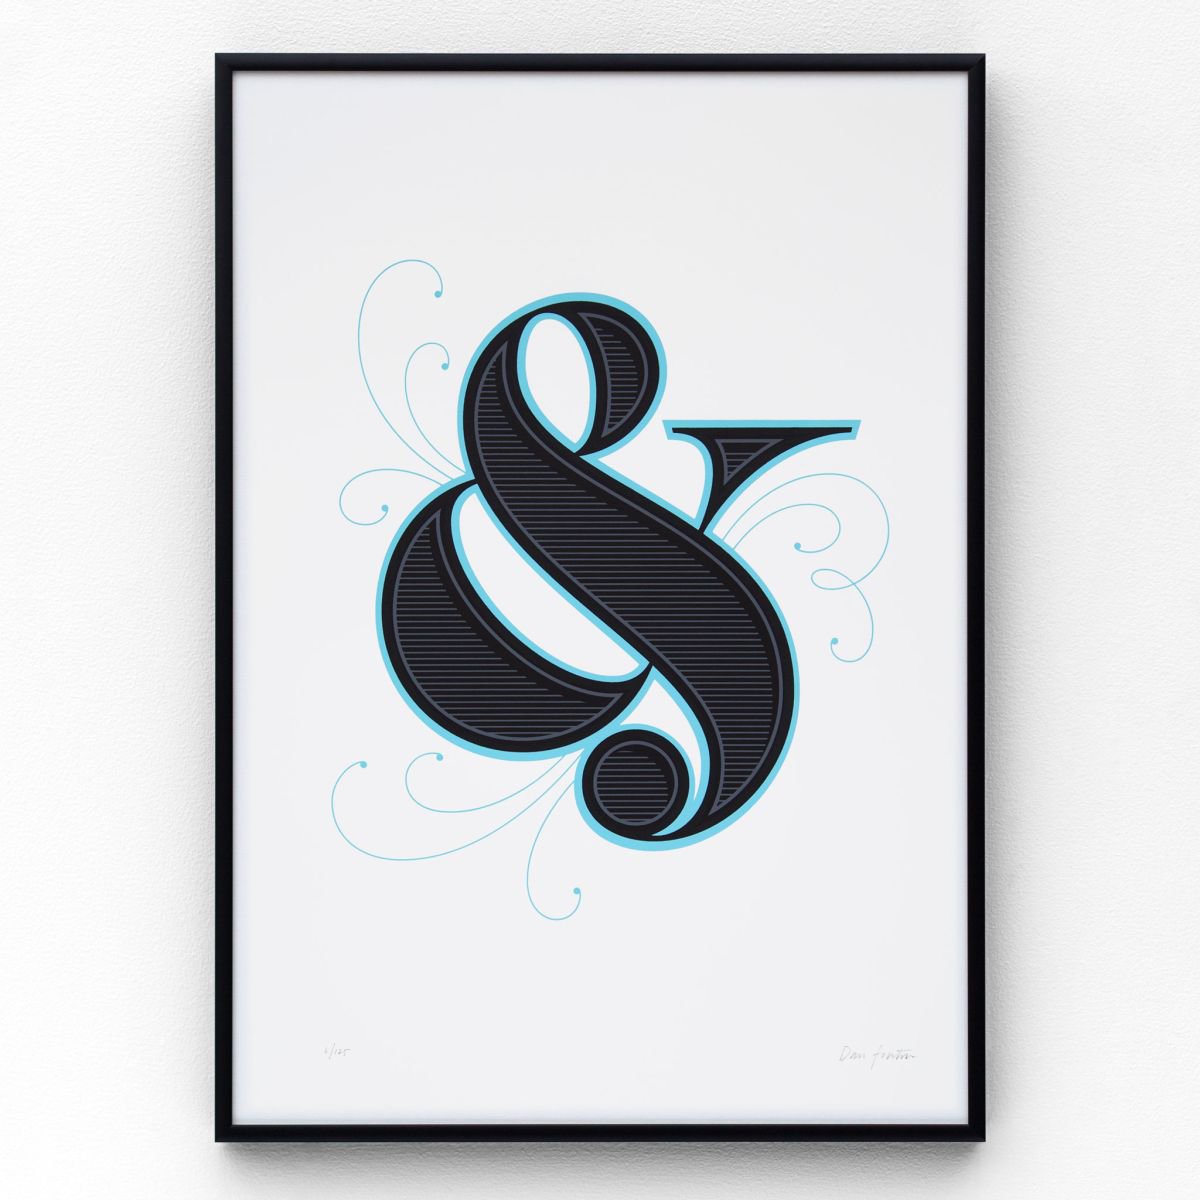 Ampersand A3 Limited Edition Screen Print by The Lost Fox